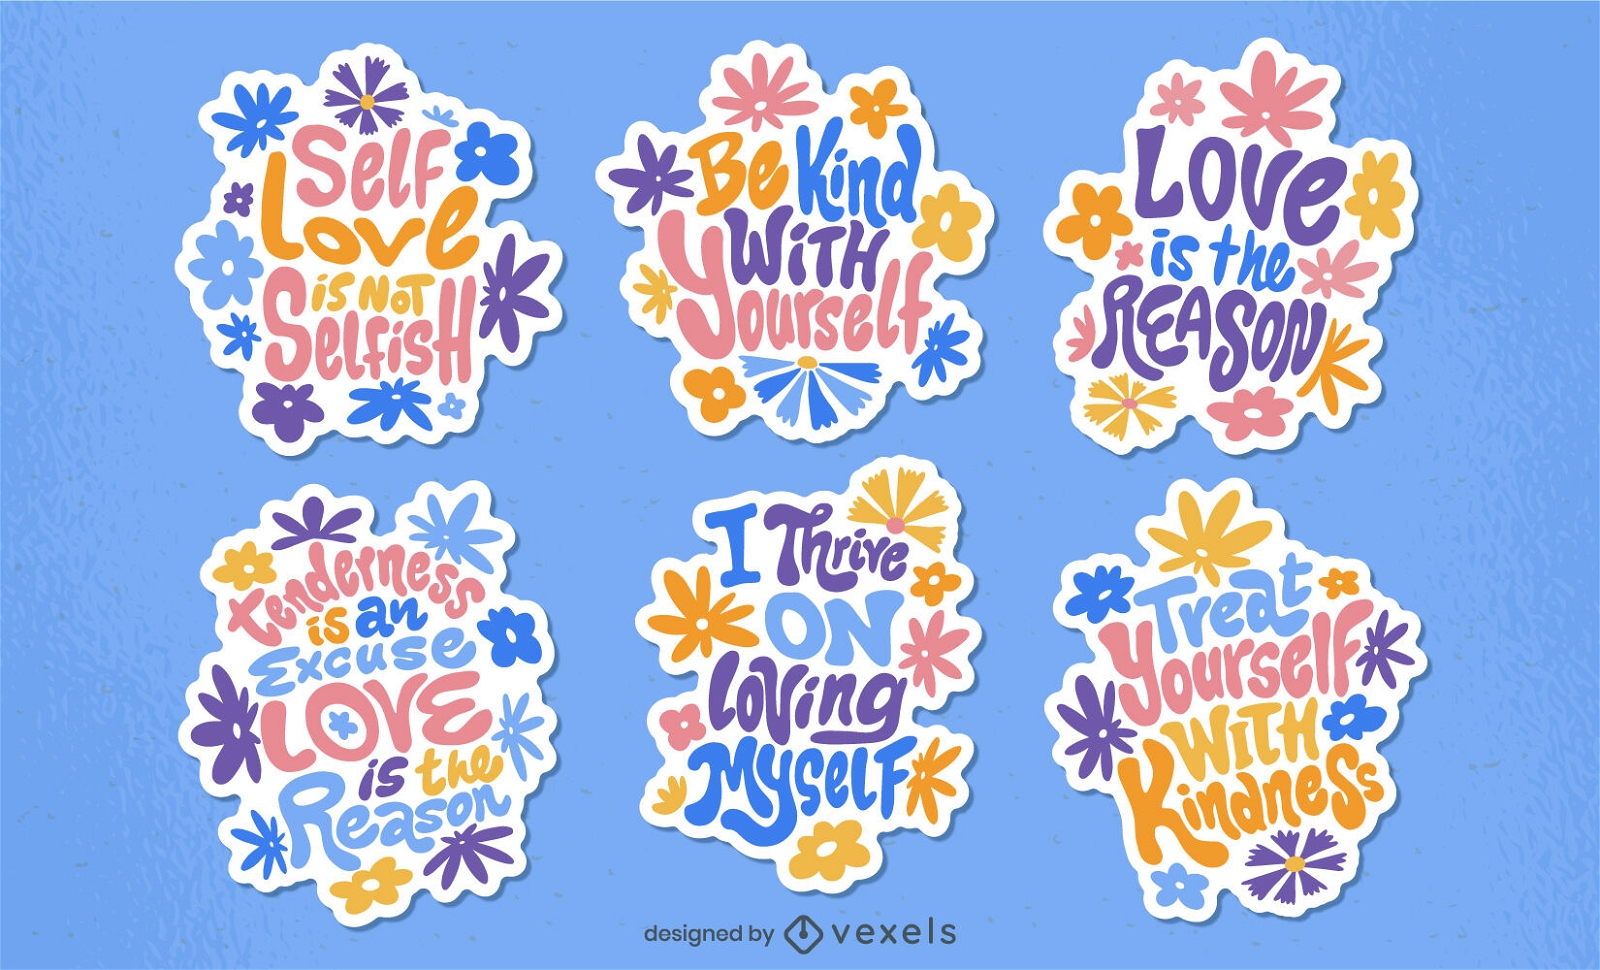 https://images.vexels.com/content/293234/preview/self-love-quotes-stickers-set-809e09.png